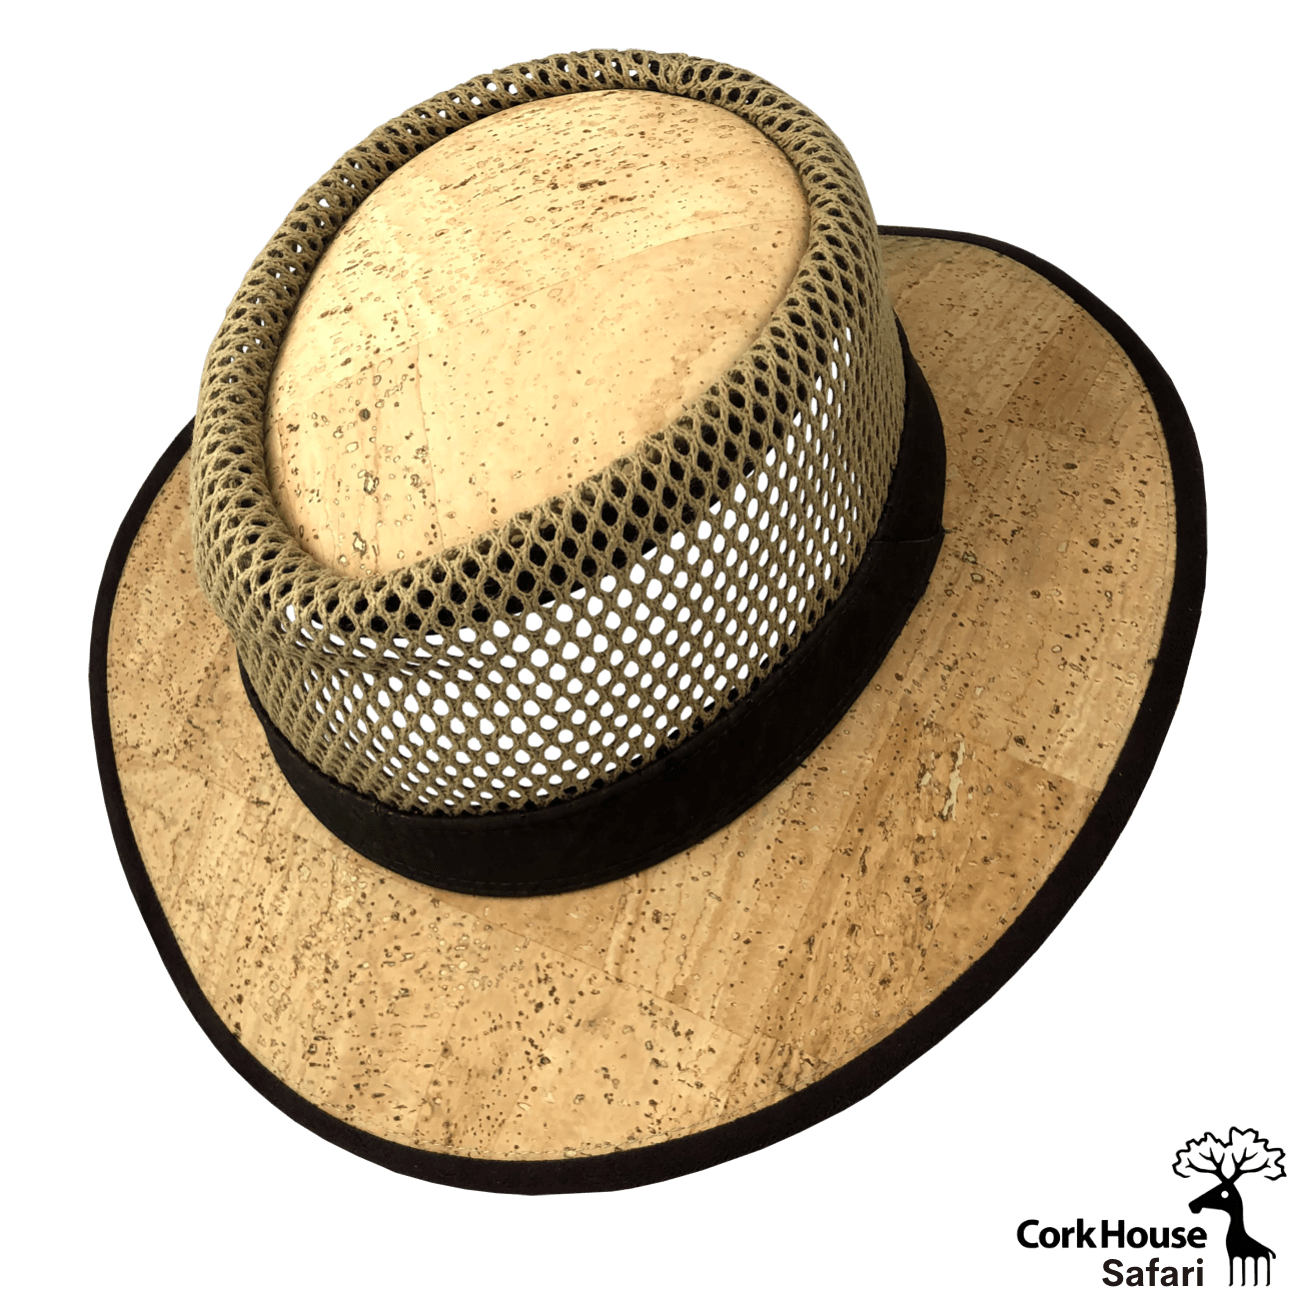 A view slightly from the top of the cork safari hat highlighting the wicker crown and dark brown cork brim binding and rim.